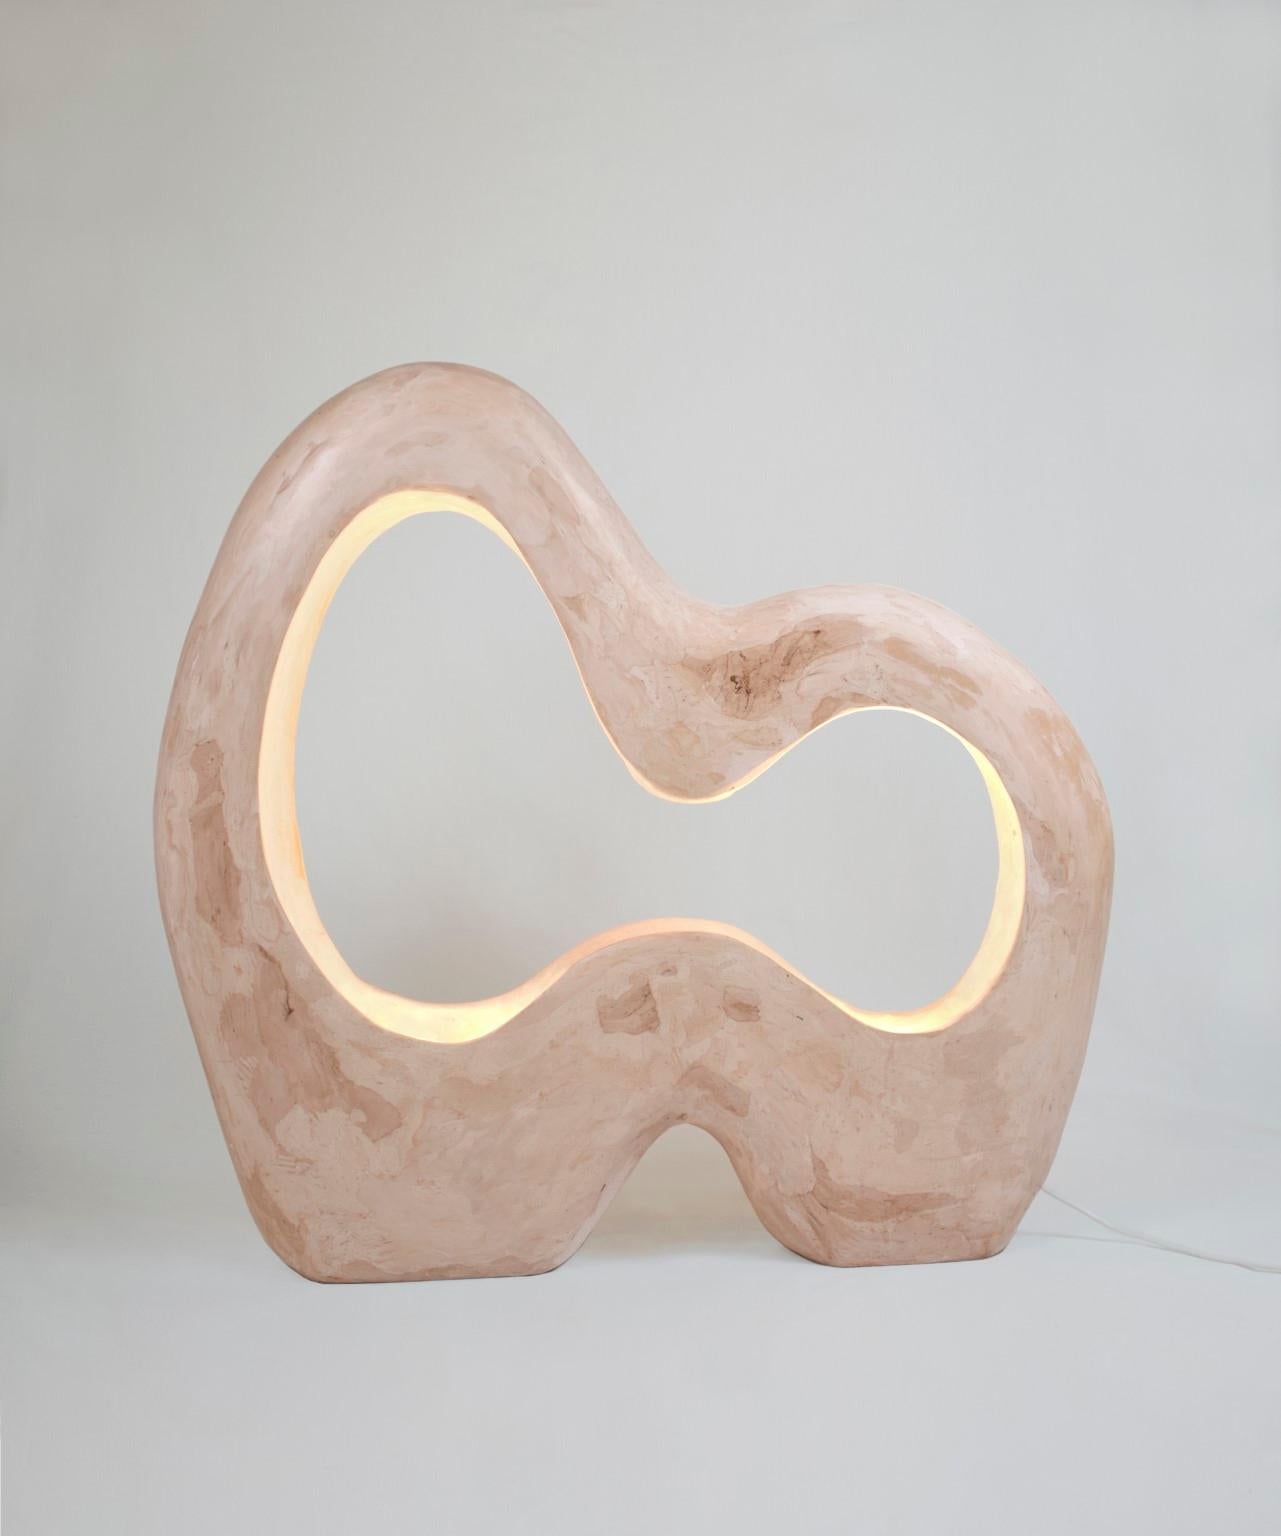 Infinite lamp by AOAO
Dimensions: W 70 x D 12 x H 70 cm
Materials: Plaster
Color options available upon request.

The idea was born after deciding to reconnect with my family and my grandfather – a sculptor artist. Learning to sculpt and being a